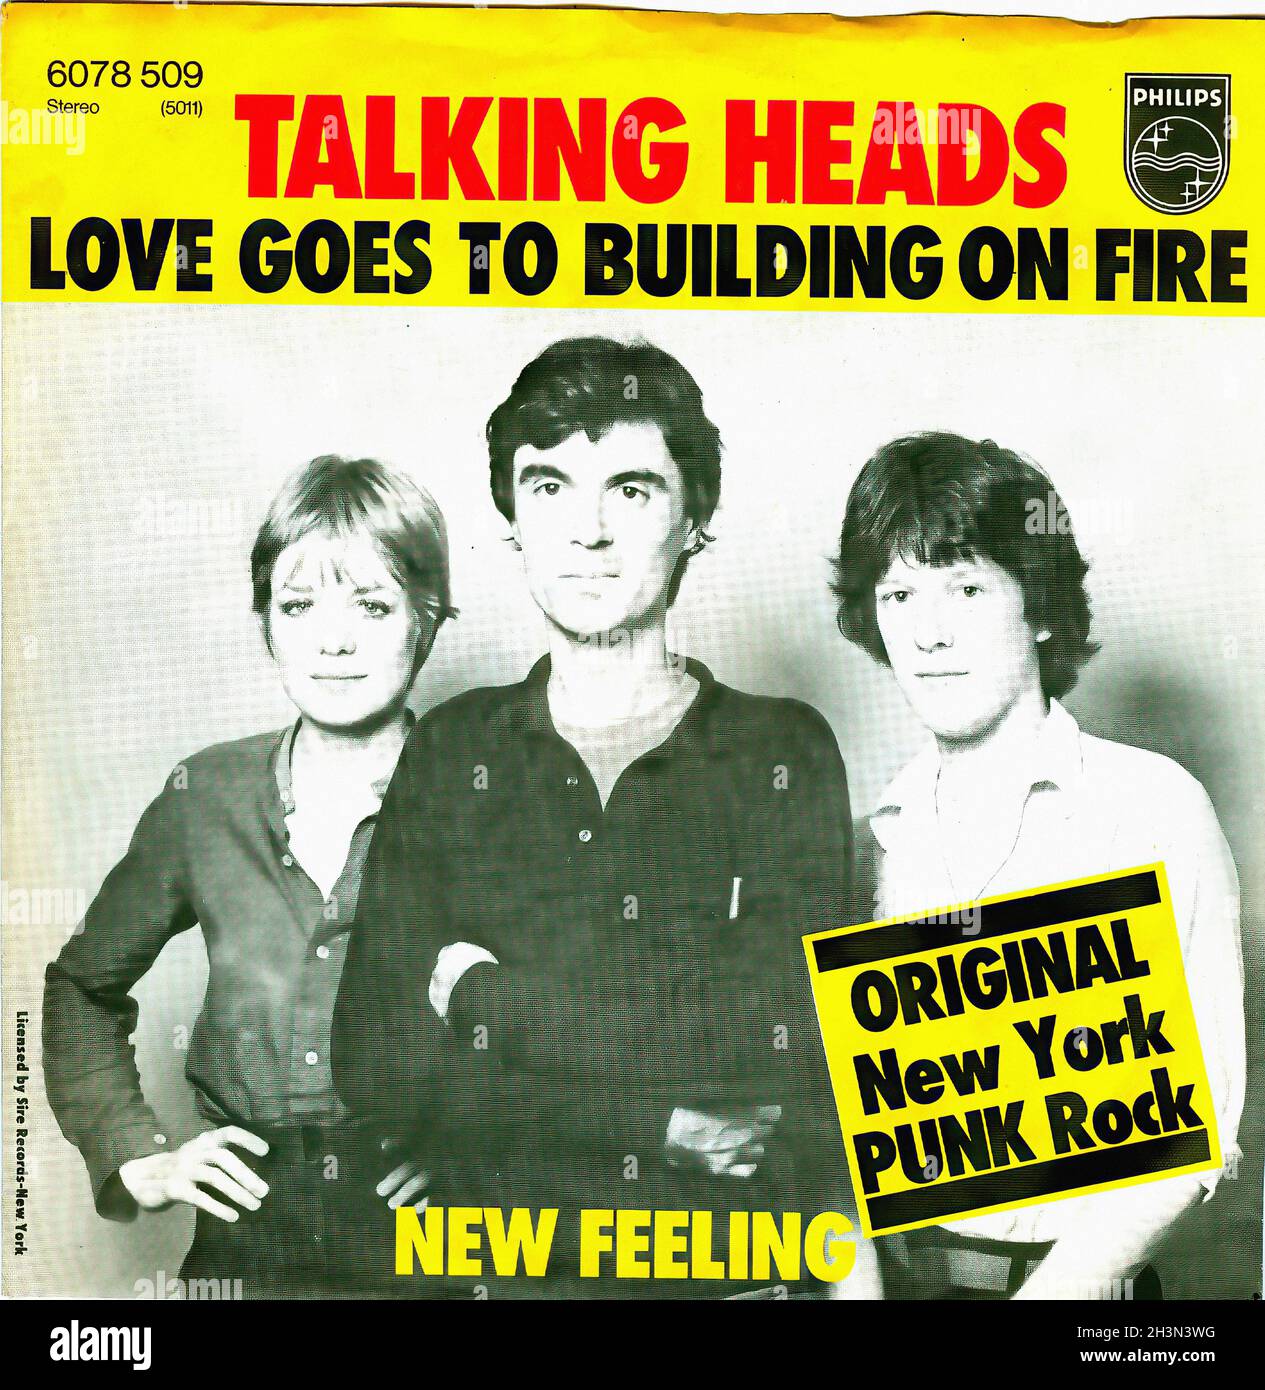 Vintage Vinyl Recording - Talking Heads - Love Goes To Building On Fire - D - 1977 Stock Photo